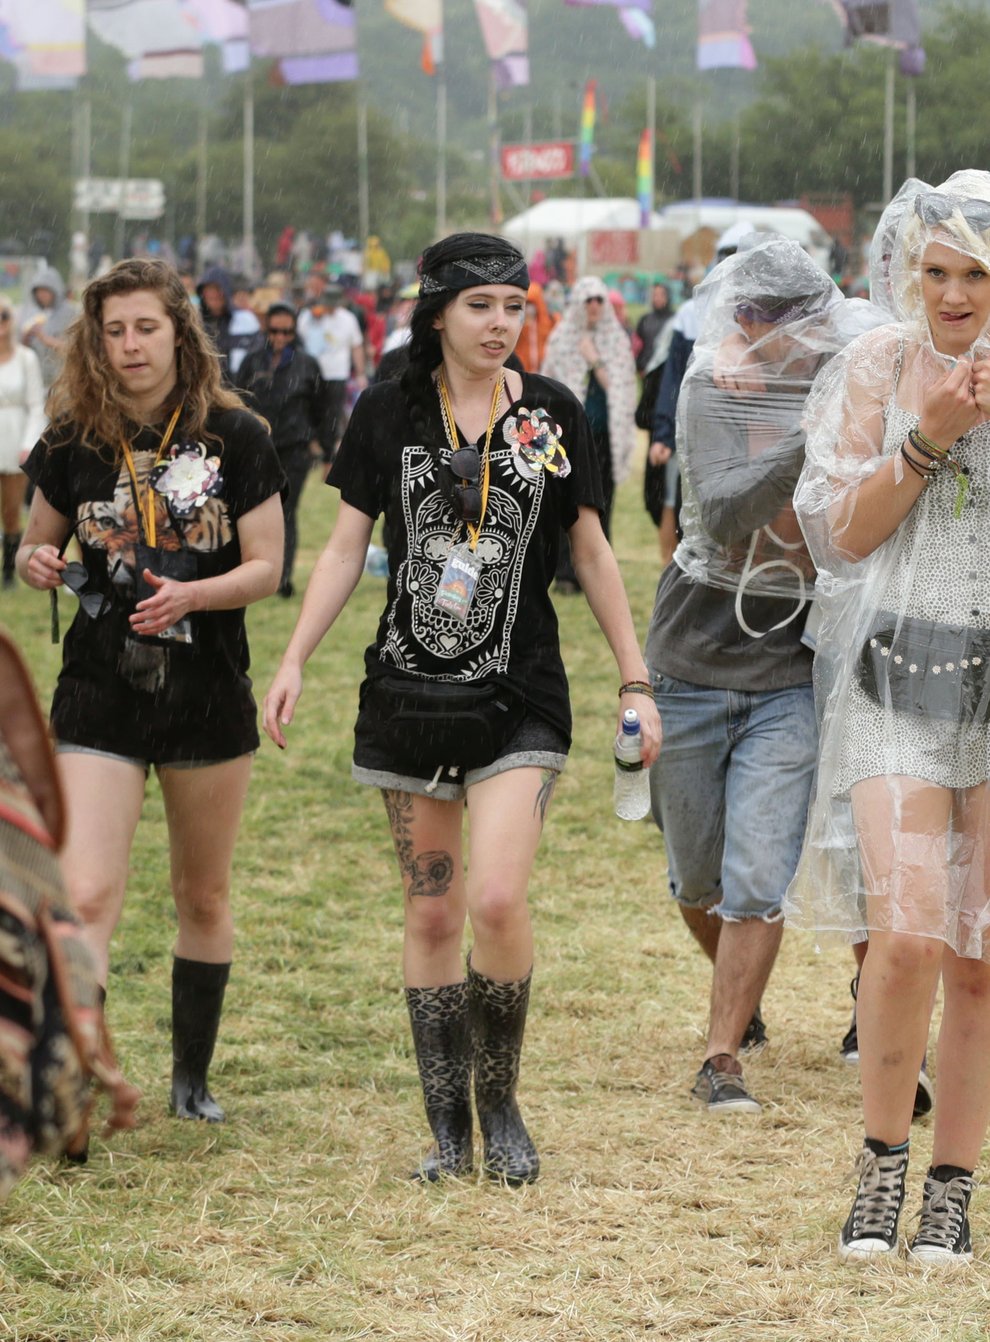 Festival goers during a rain shower at the Glastonbury Festival (PA)